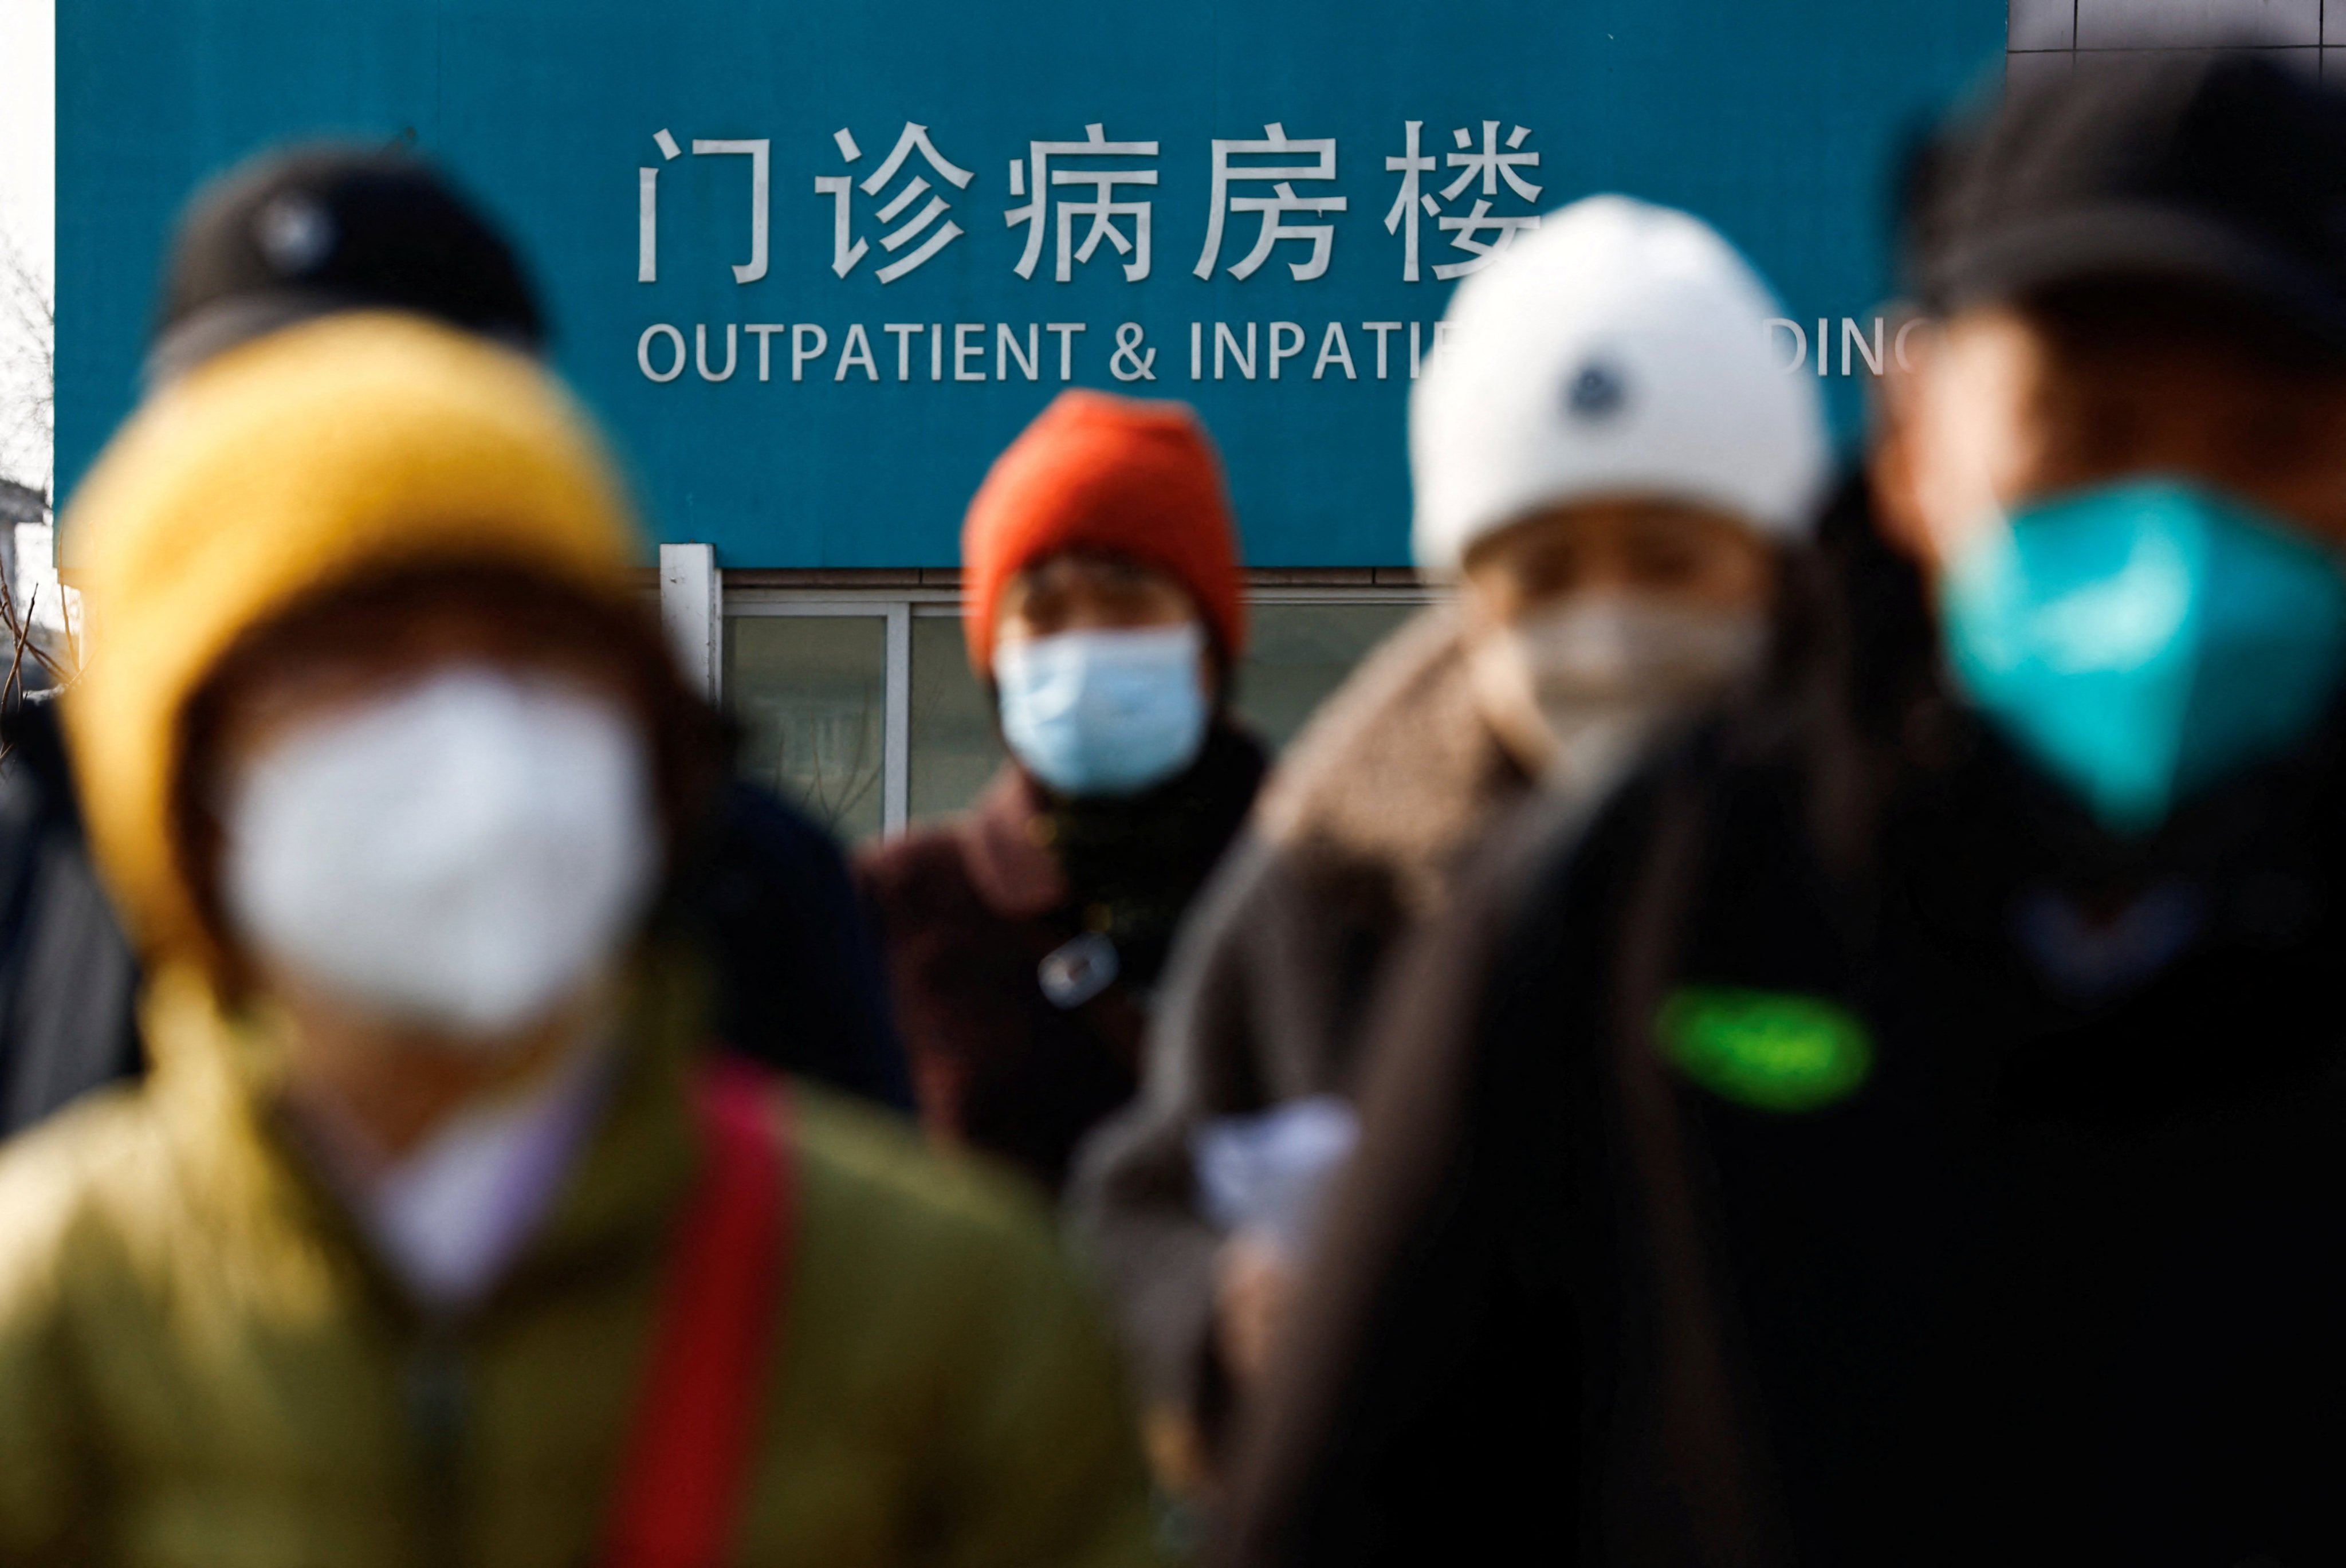 People walk on an overpass near a hospital in Beijing on February 16. China’s healthcare system is in the midst of an anti-corruption crackdown. Photo: Reuters